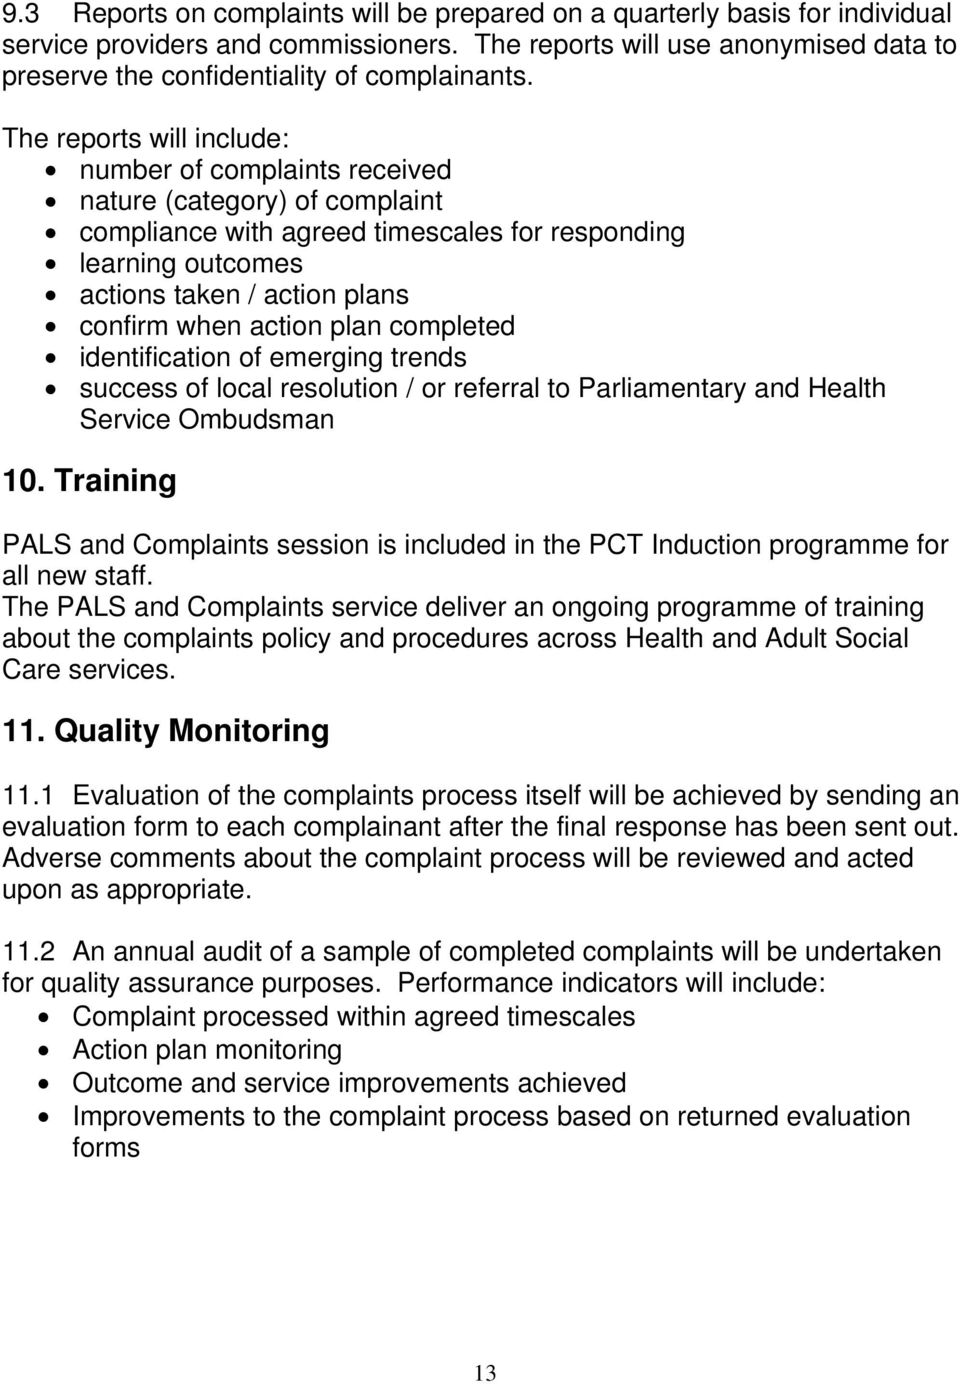 The reports will include: number of complaints received nature (category) of complaint compliance with agreed timescales for responding learning outcomes actions taken / action plans confirm when